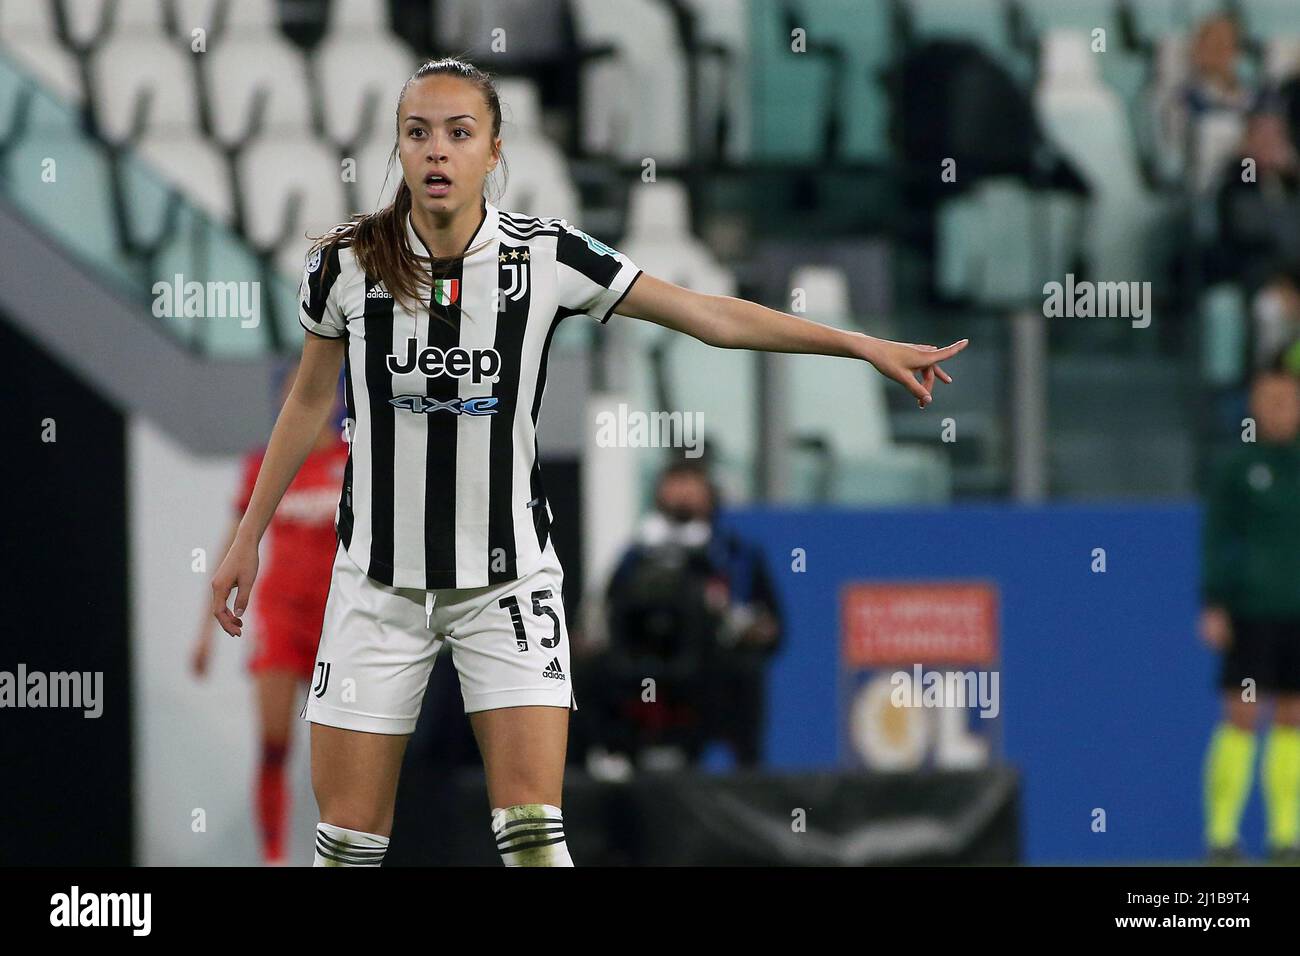 julia-grosso-juventus-women-during-the-uefa-champions-league-women-football-match-juventus-women-vs-olympique-lyonnais-on-march-23-2022-at-the-allianz-stadium-in-turin-italy-photo-by-claudio-benedettolivemediasipa-usa-2J1B9T4.jpg